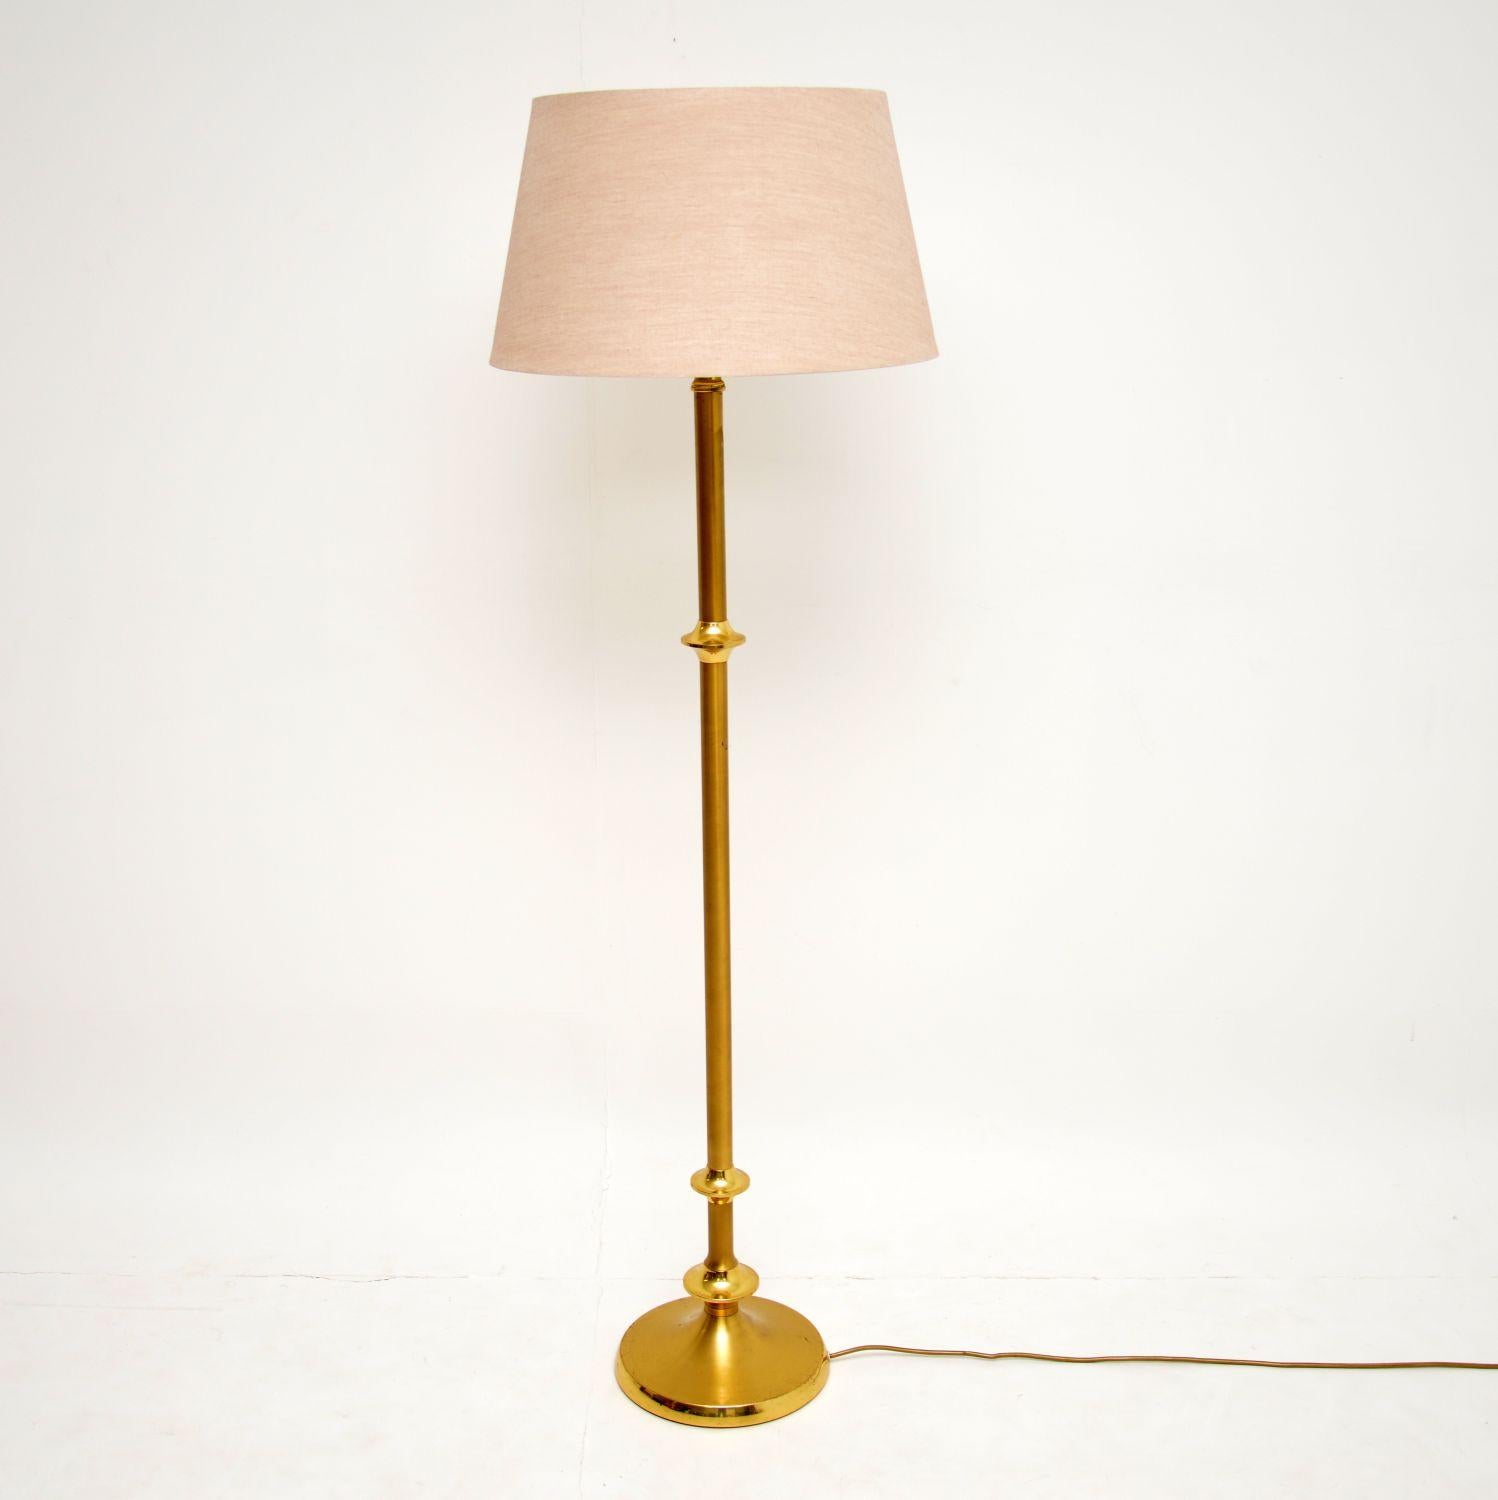 A beautifully styled vintage brass floor lamp, this dates from circa 1970s.

It’s in nice original condition, the brass has some minor surface wear here and there, there are one or two minor dings on the base.

We have paired this with a high